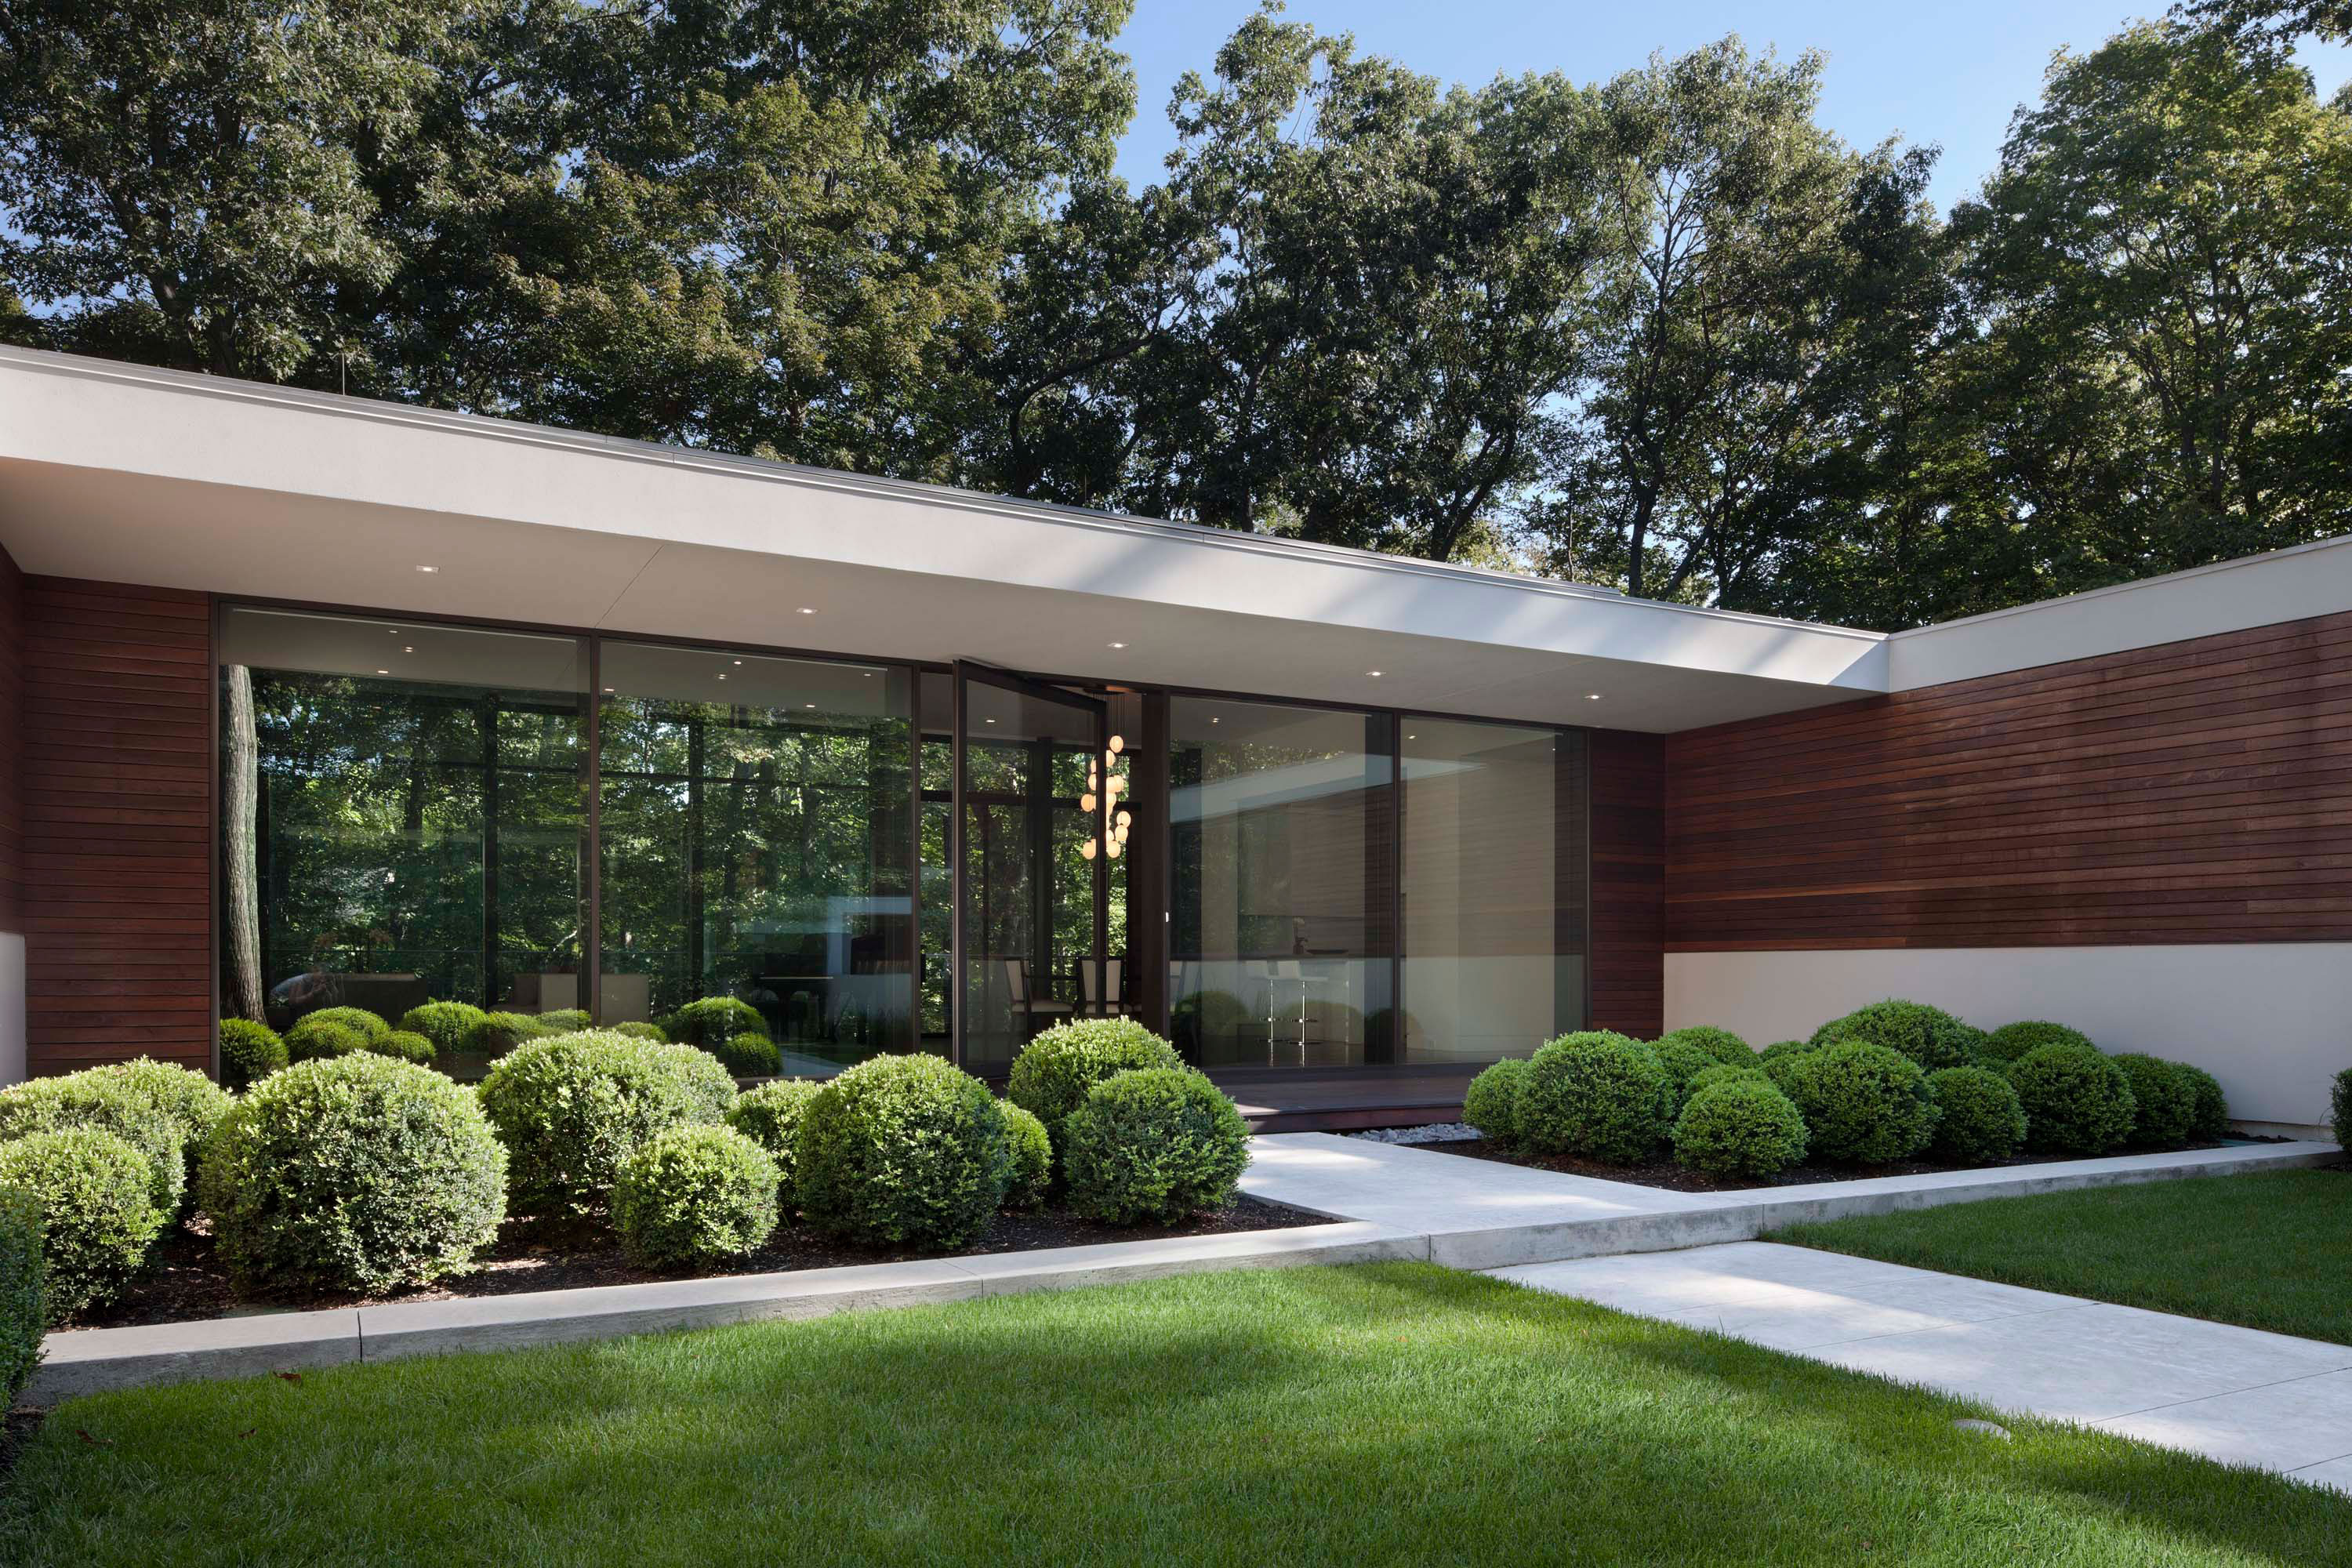 Exterior photo of the New Canaan Residence by Specht Novak Architects. Shot by Elizabeth Felicella featuring the glass and concrete structure from a side view of the home highlighting a connecting garden.